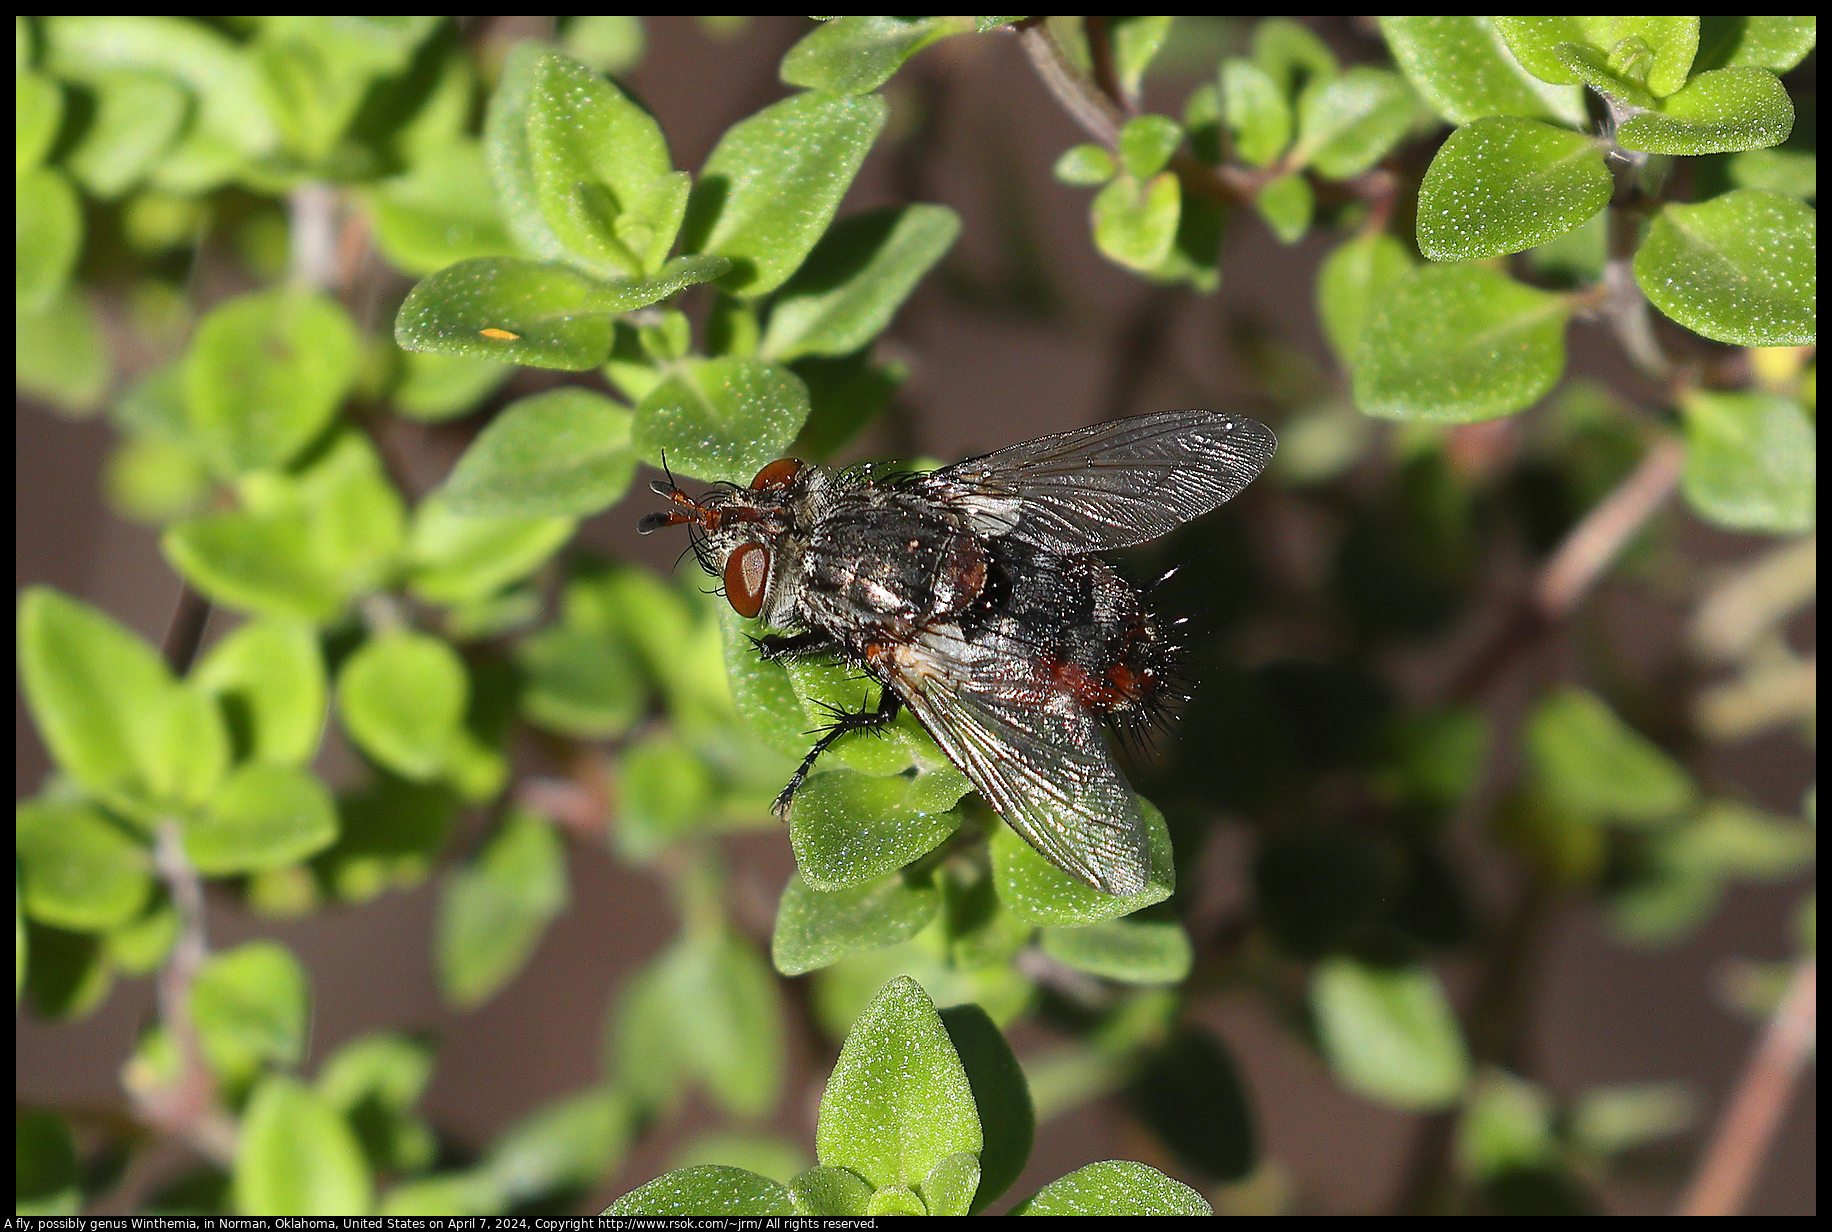 A fly, possibly genus Winthemia, in Norman, Oklahoma, United States on April 7, 2024